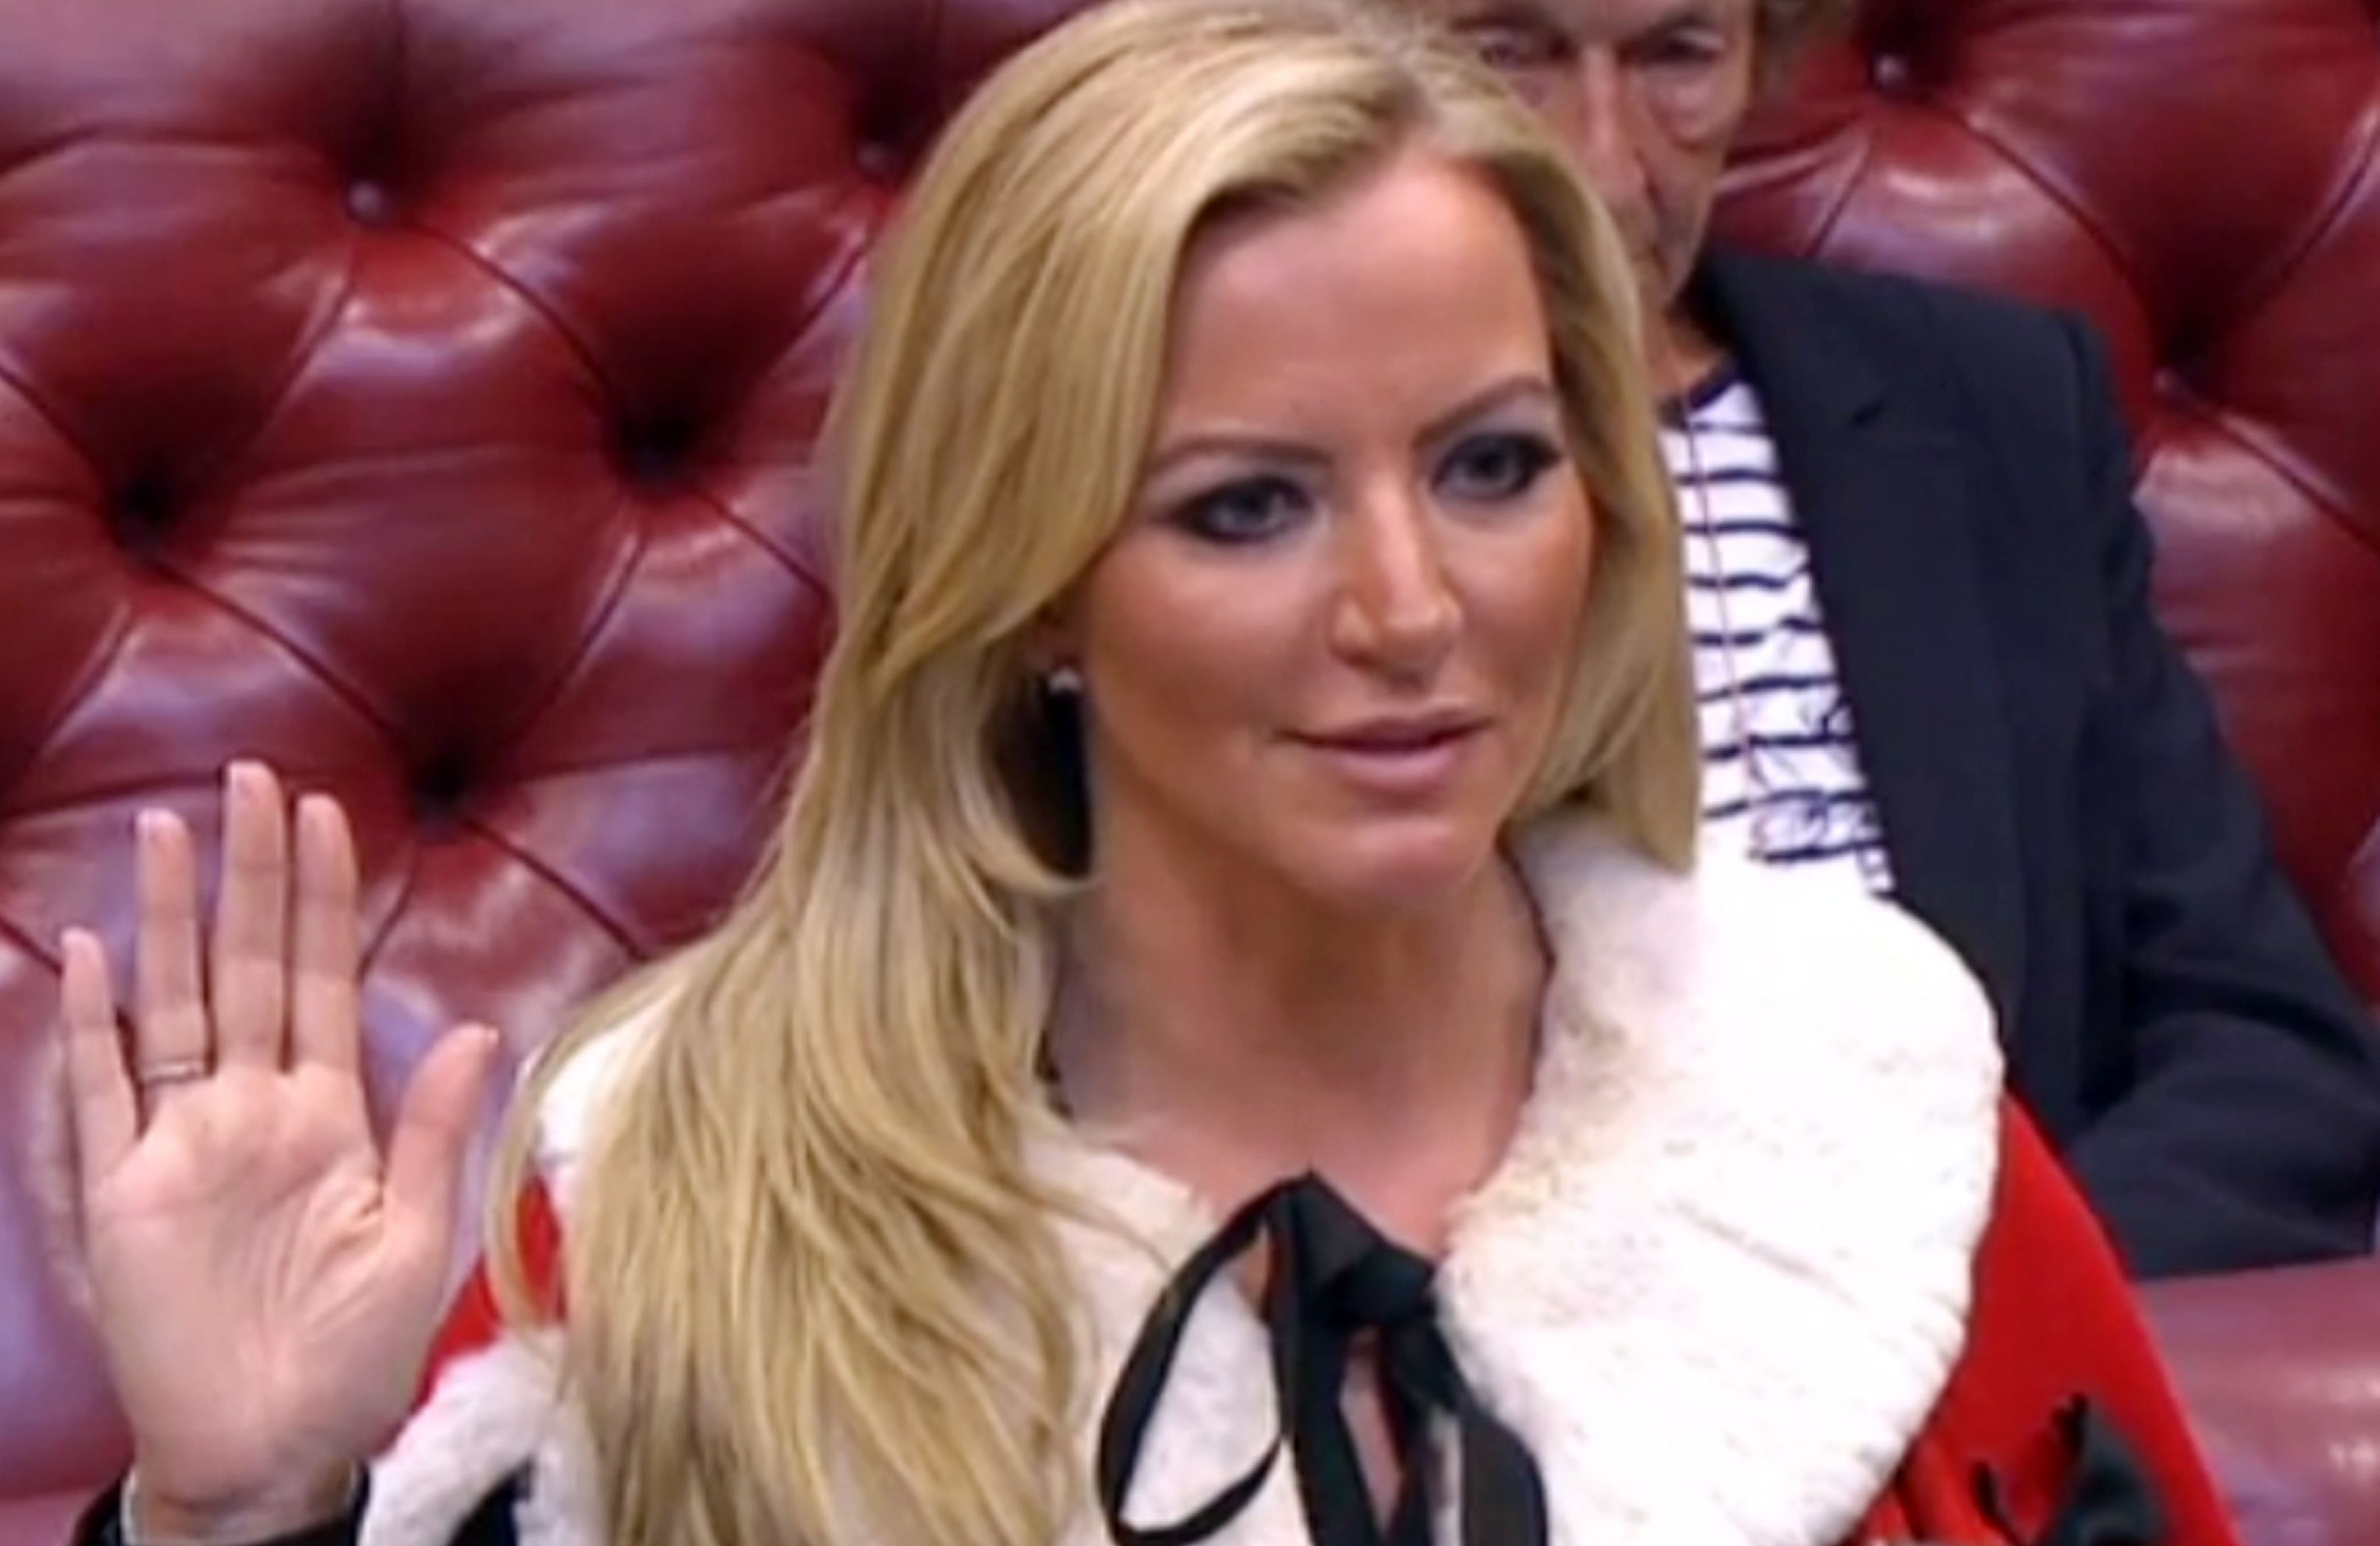 Baroness Mone has spoken four times since being ennobled in 2015